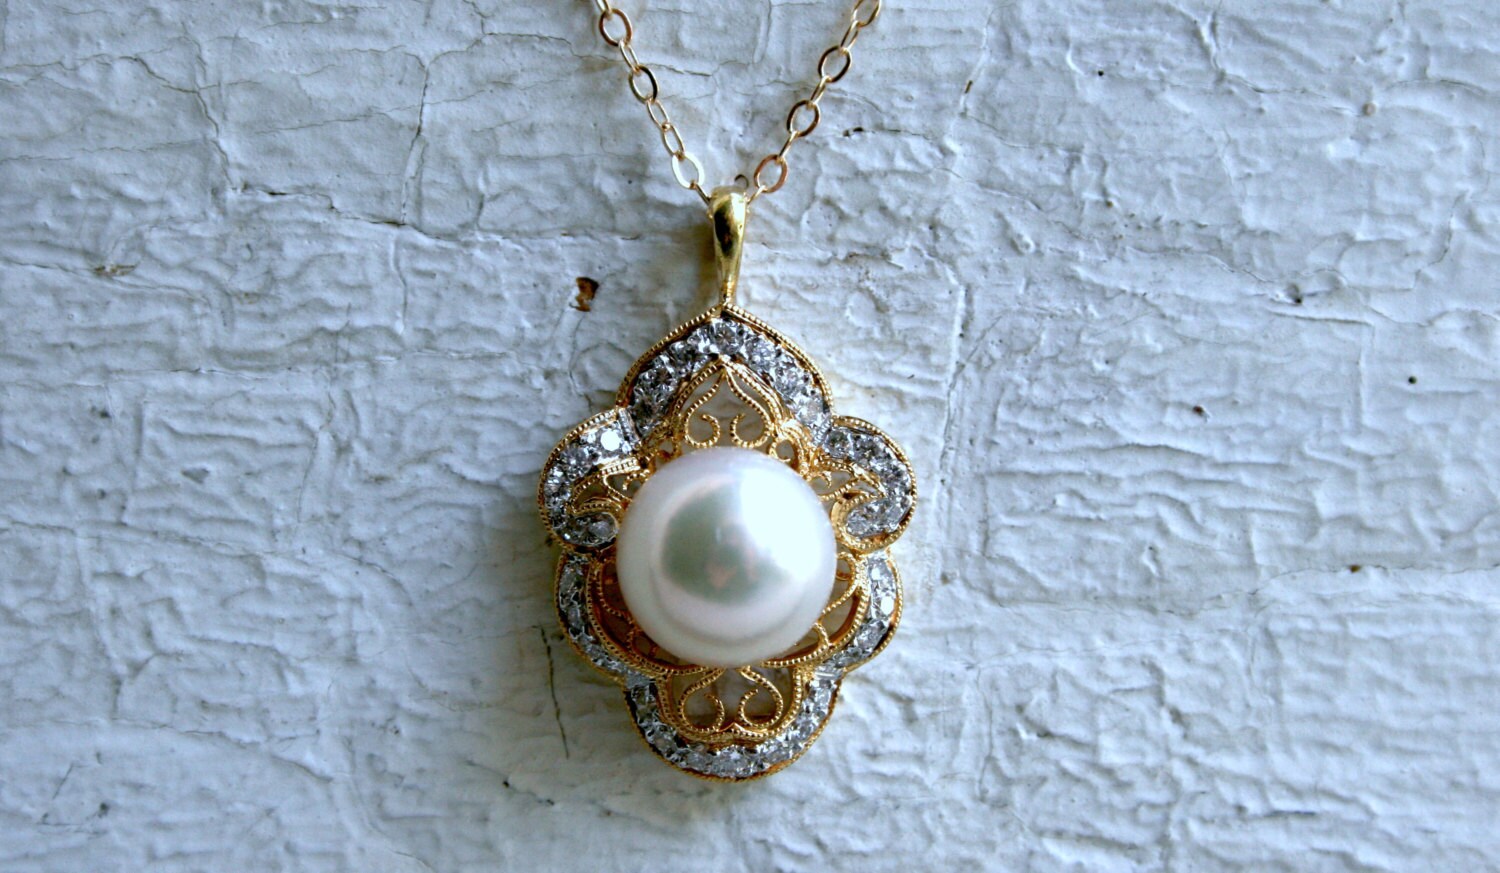 Vintage 18K Yellow Gold Diamond and Pearl Pendant with Chain.